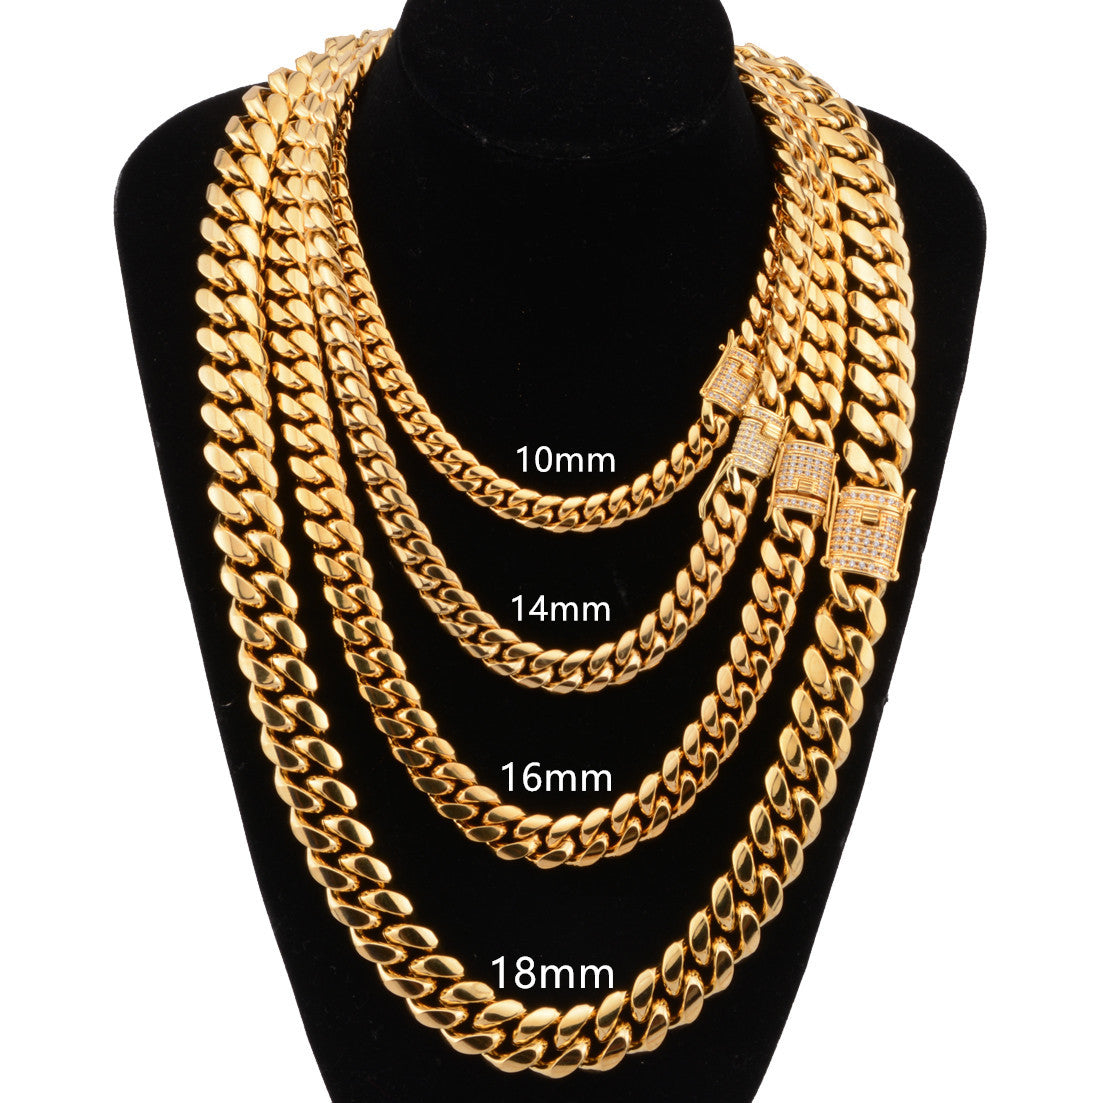       8-18mm Wide Stainless Steel Cuban Miami Chains Necklaces with CZ Zirco – BEAUTY NET